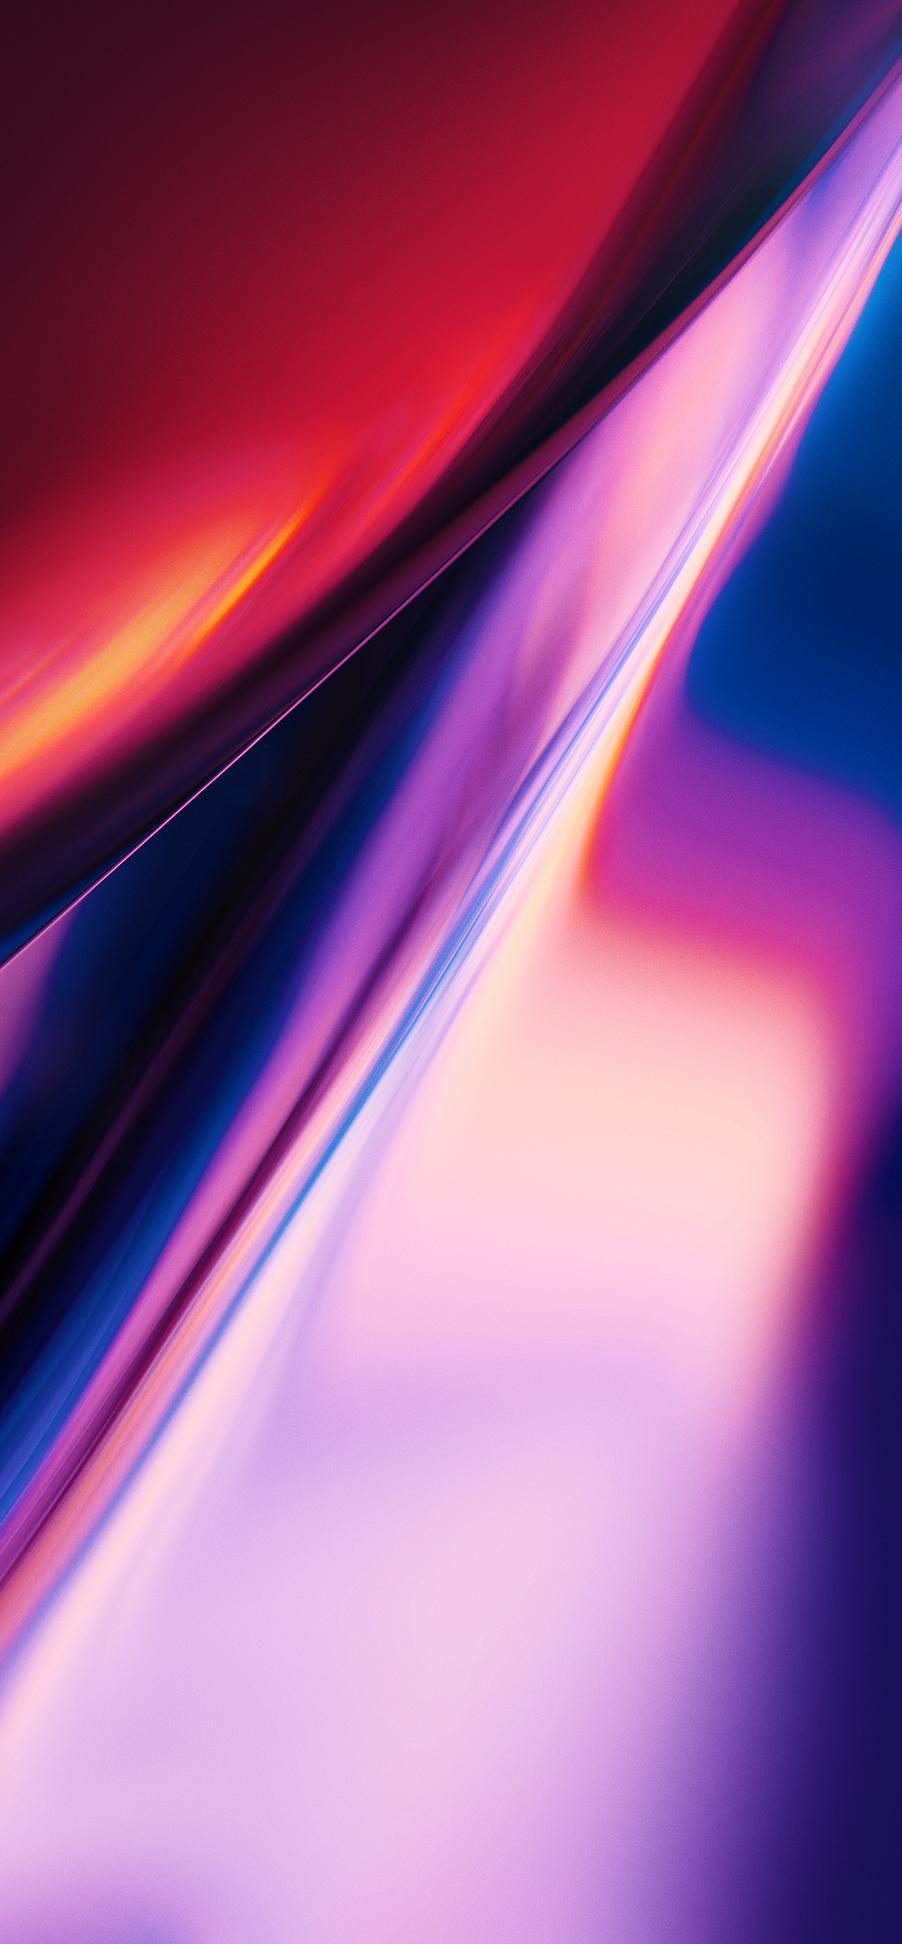 OnePlus 7 Pro Wallpapers - Wallpaper Cave